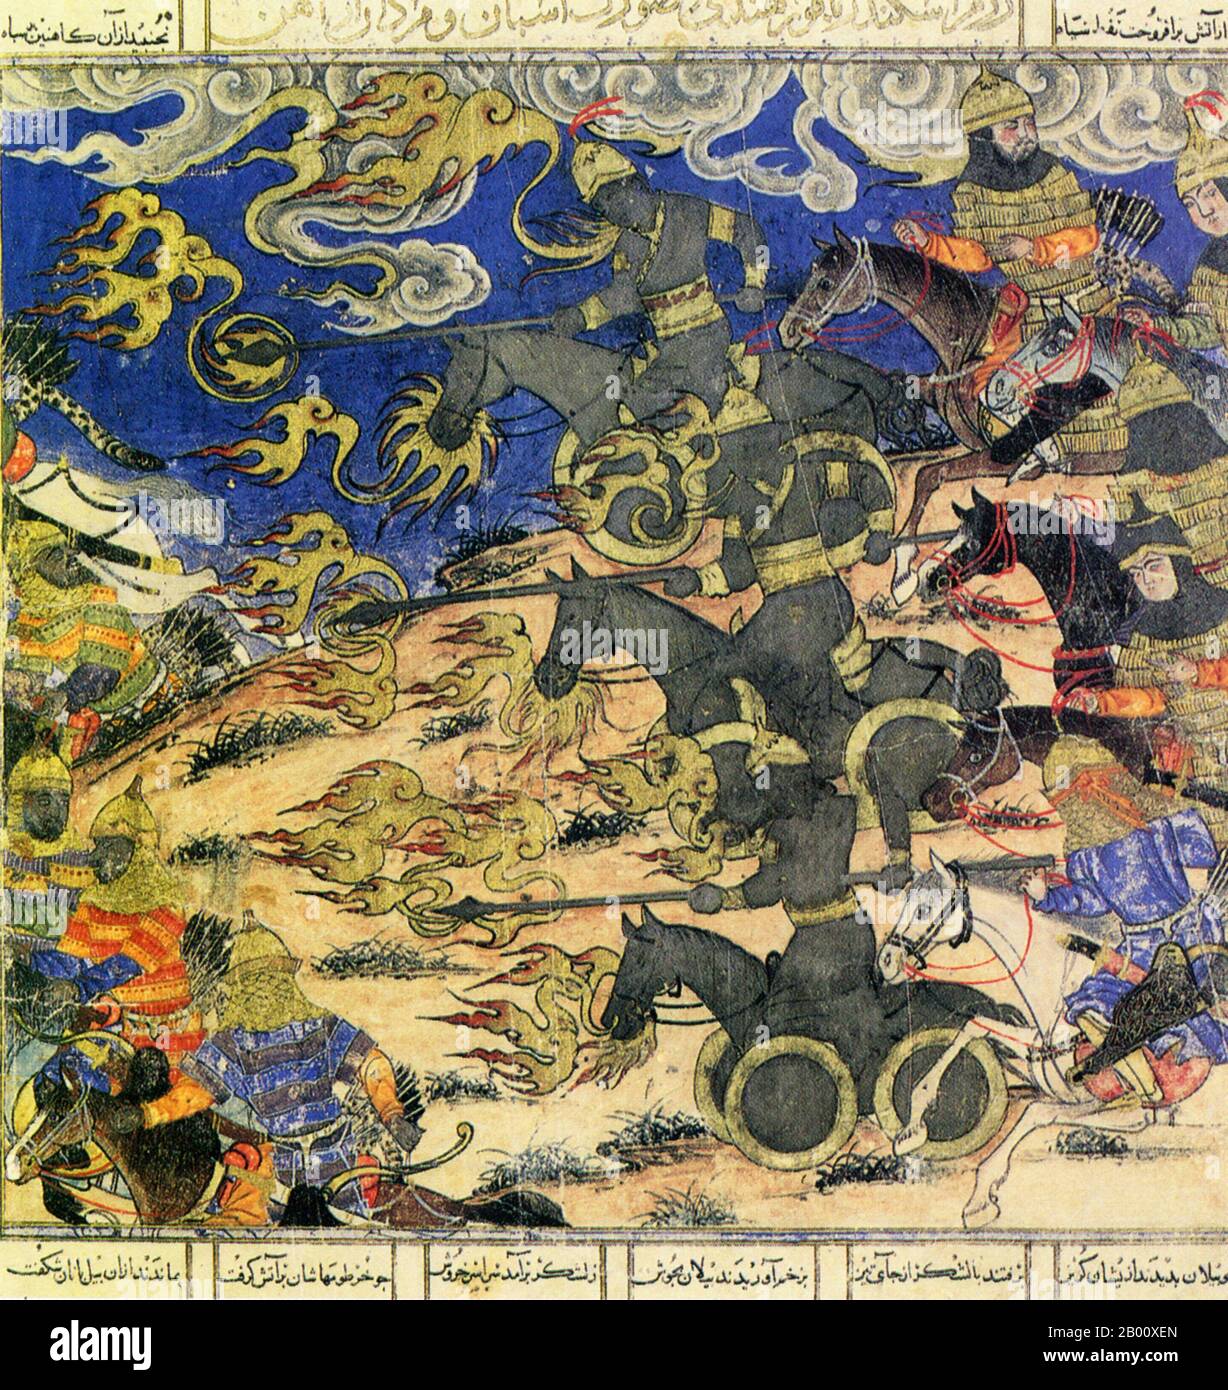 Iran/Macedonia: The Iron Cavalry of Alexander the Great charge the enemy with chariots and fire-breathing horses in this 14th-century miniature painting from the Demotte version of the ‘Shahnameh’.    The national Persian epic, the ‘Shahnameh’, meaning ‘The King’s Chronicles’, is a poetic opus written around 1000 CE by Ferdowsi. Regarded as the national folktale of Greater Persia, the Shahnameh consists of some 60,000 verses and tells the mythical and historical past of (Greater) Iran from the creation of the world up until the Islamic conquest of Persia in the 7th century. Stock Photo